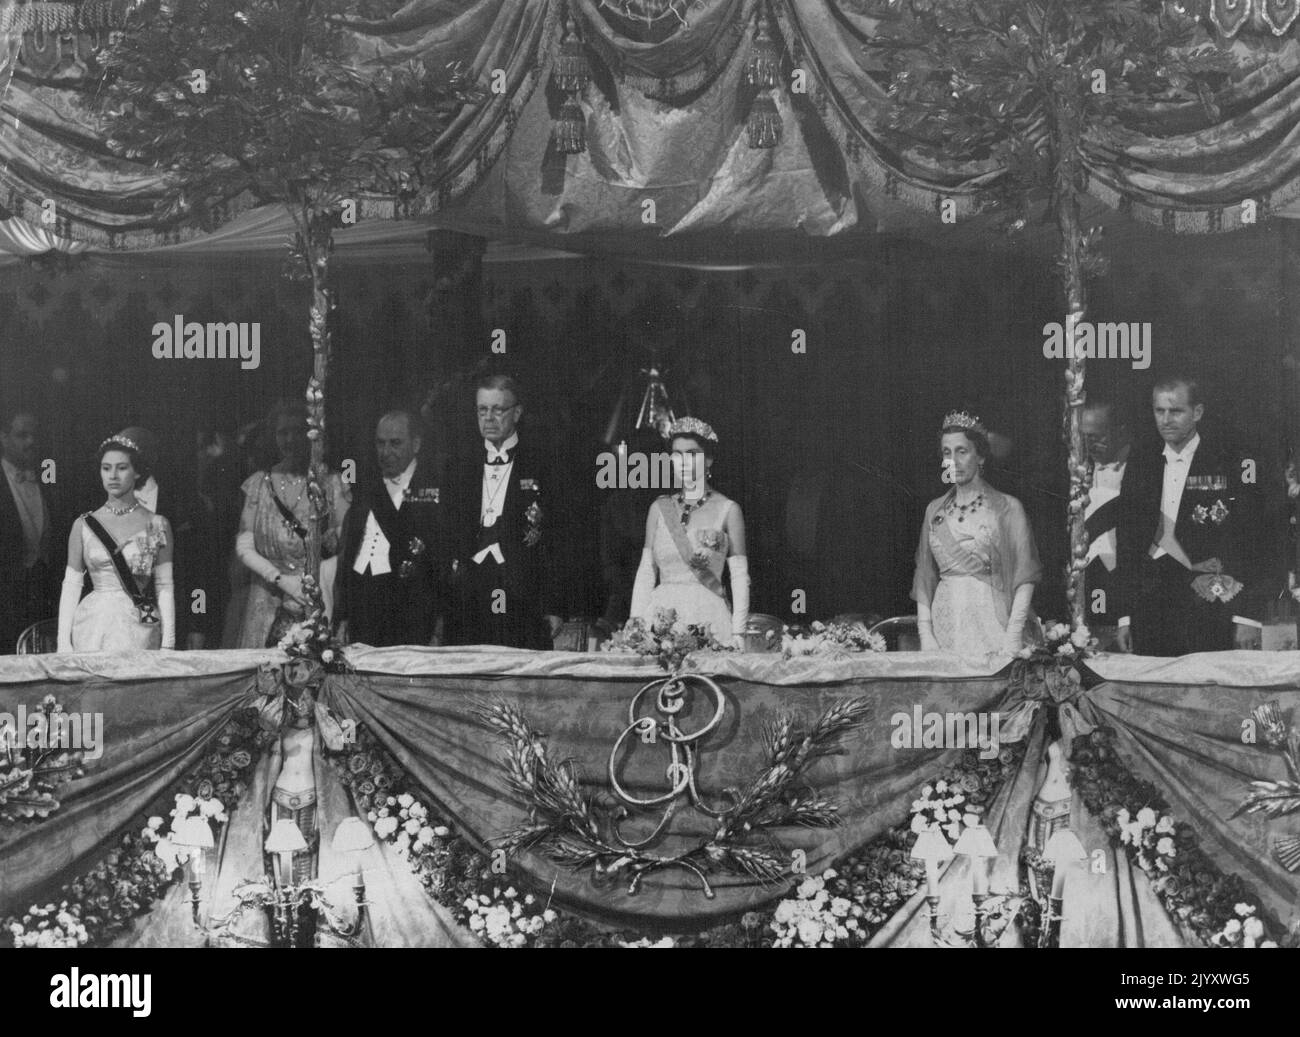 Jewels and Orders ***** and Colour he Brilliant Scene in The Royal Box As The Queen and her Guests Stand During The Playing of The National ***** before The Gala Performance Give at The Royal Opera House Covent Grader, London, This Evening (Wednesday) in Honour of King Gustav Adolf and Queen Louise of Sweden, Now on A State Visit to Britain. Left to Right Princess Margaret: Lord Waverley: King ***** Adolf: The Queen: Queen Louise: The Marques of Salisbury: and The Duke of Edinburgh. June 30, 1954. (Photo by Reuterphoto) Stock Photo